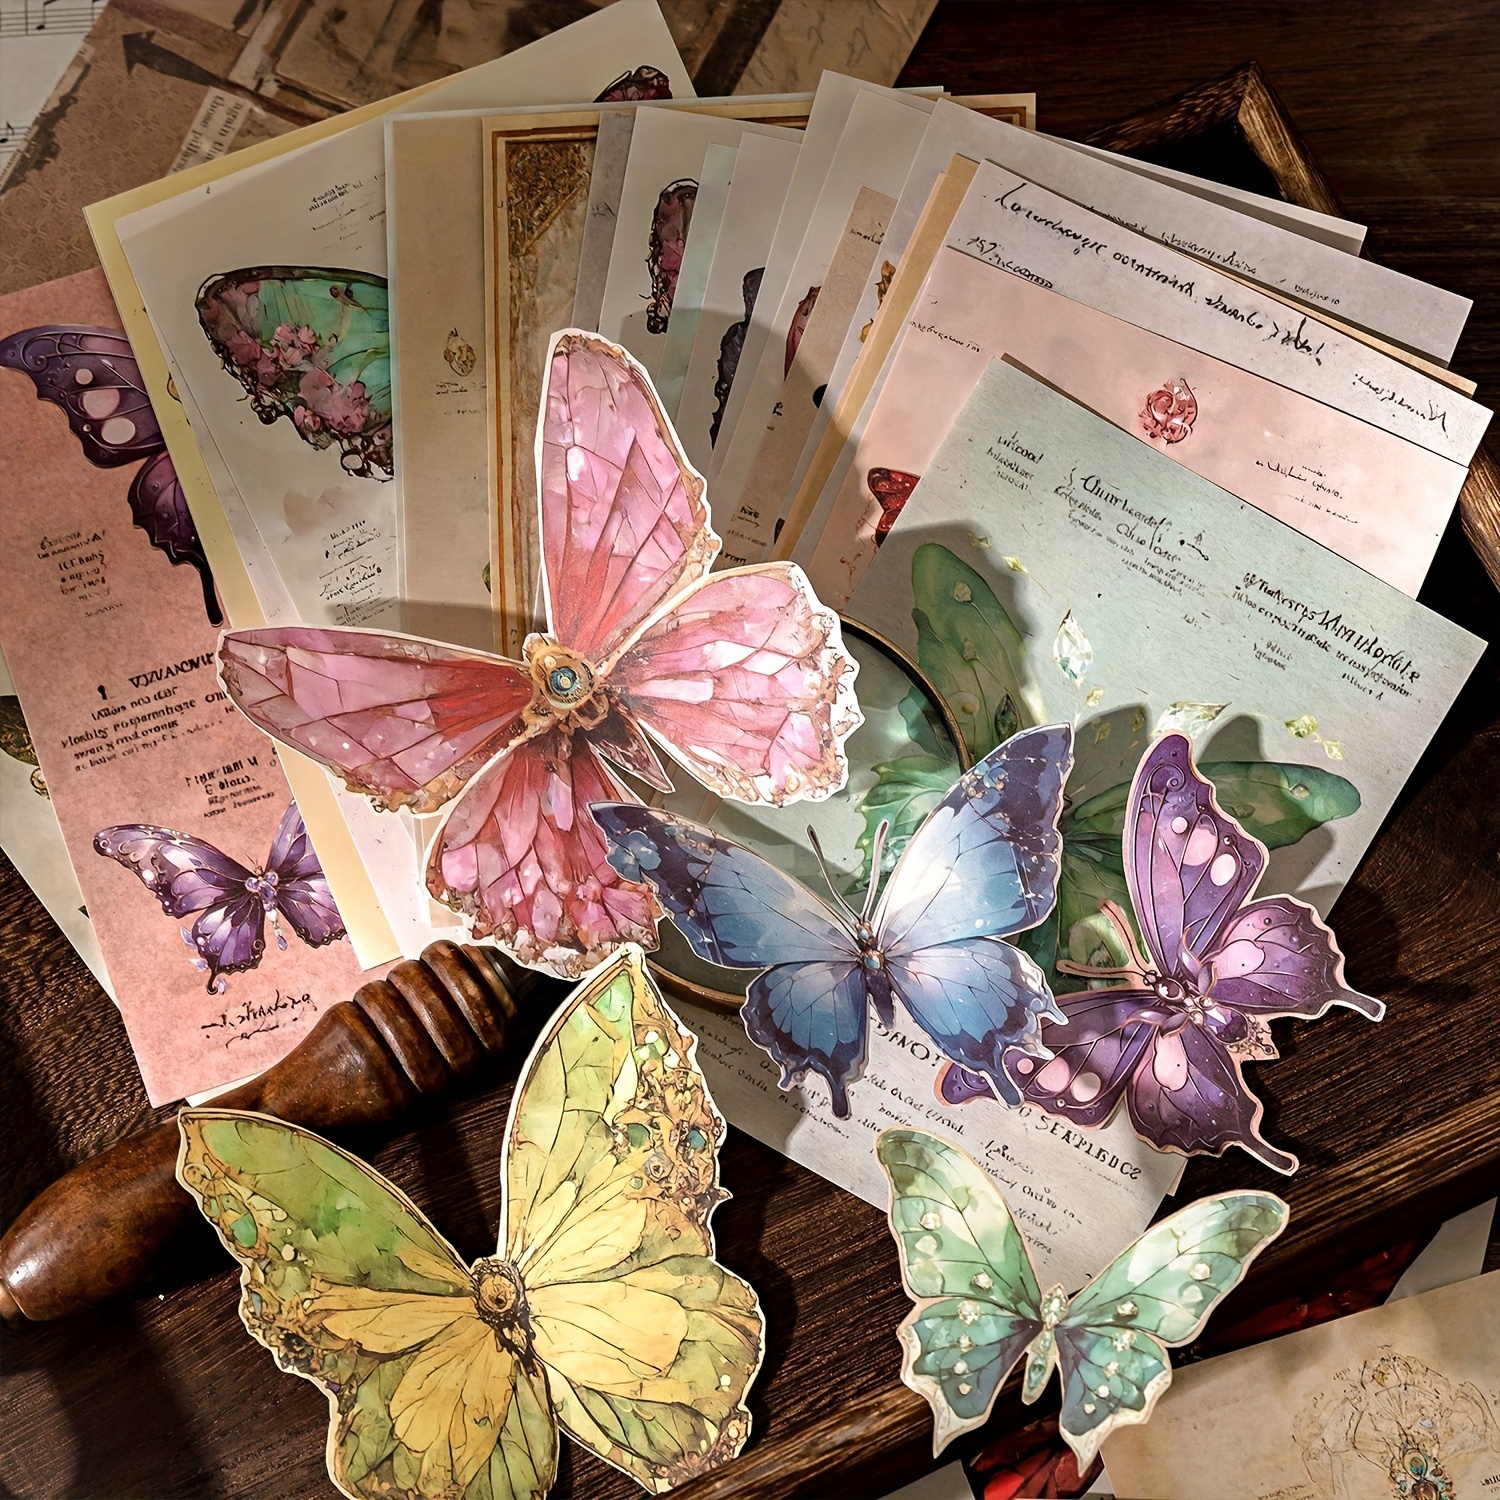 60pcs Vintage Materials Mini Book Butterfly Flower DIY Scrapbooking Diary  Creative Stationery Collage Photo Album Craft Paper